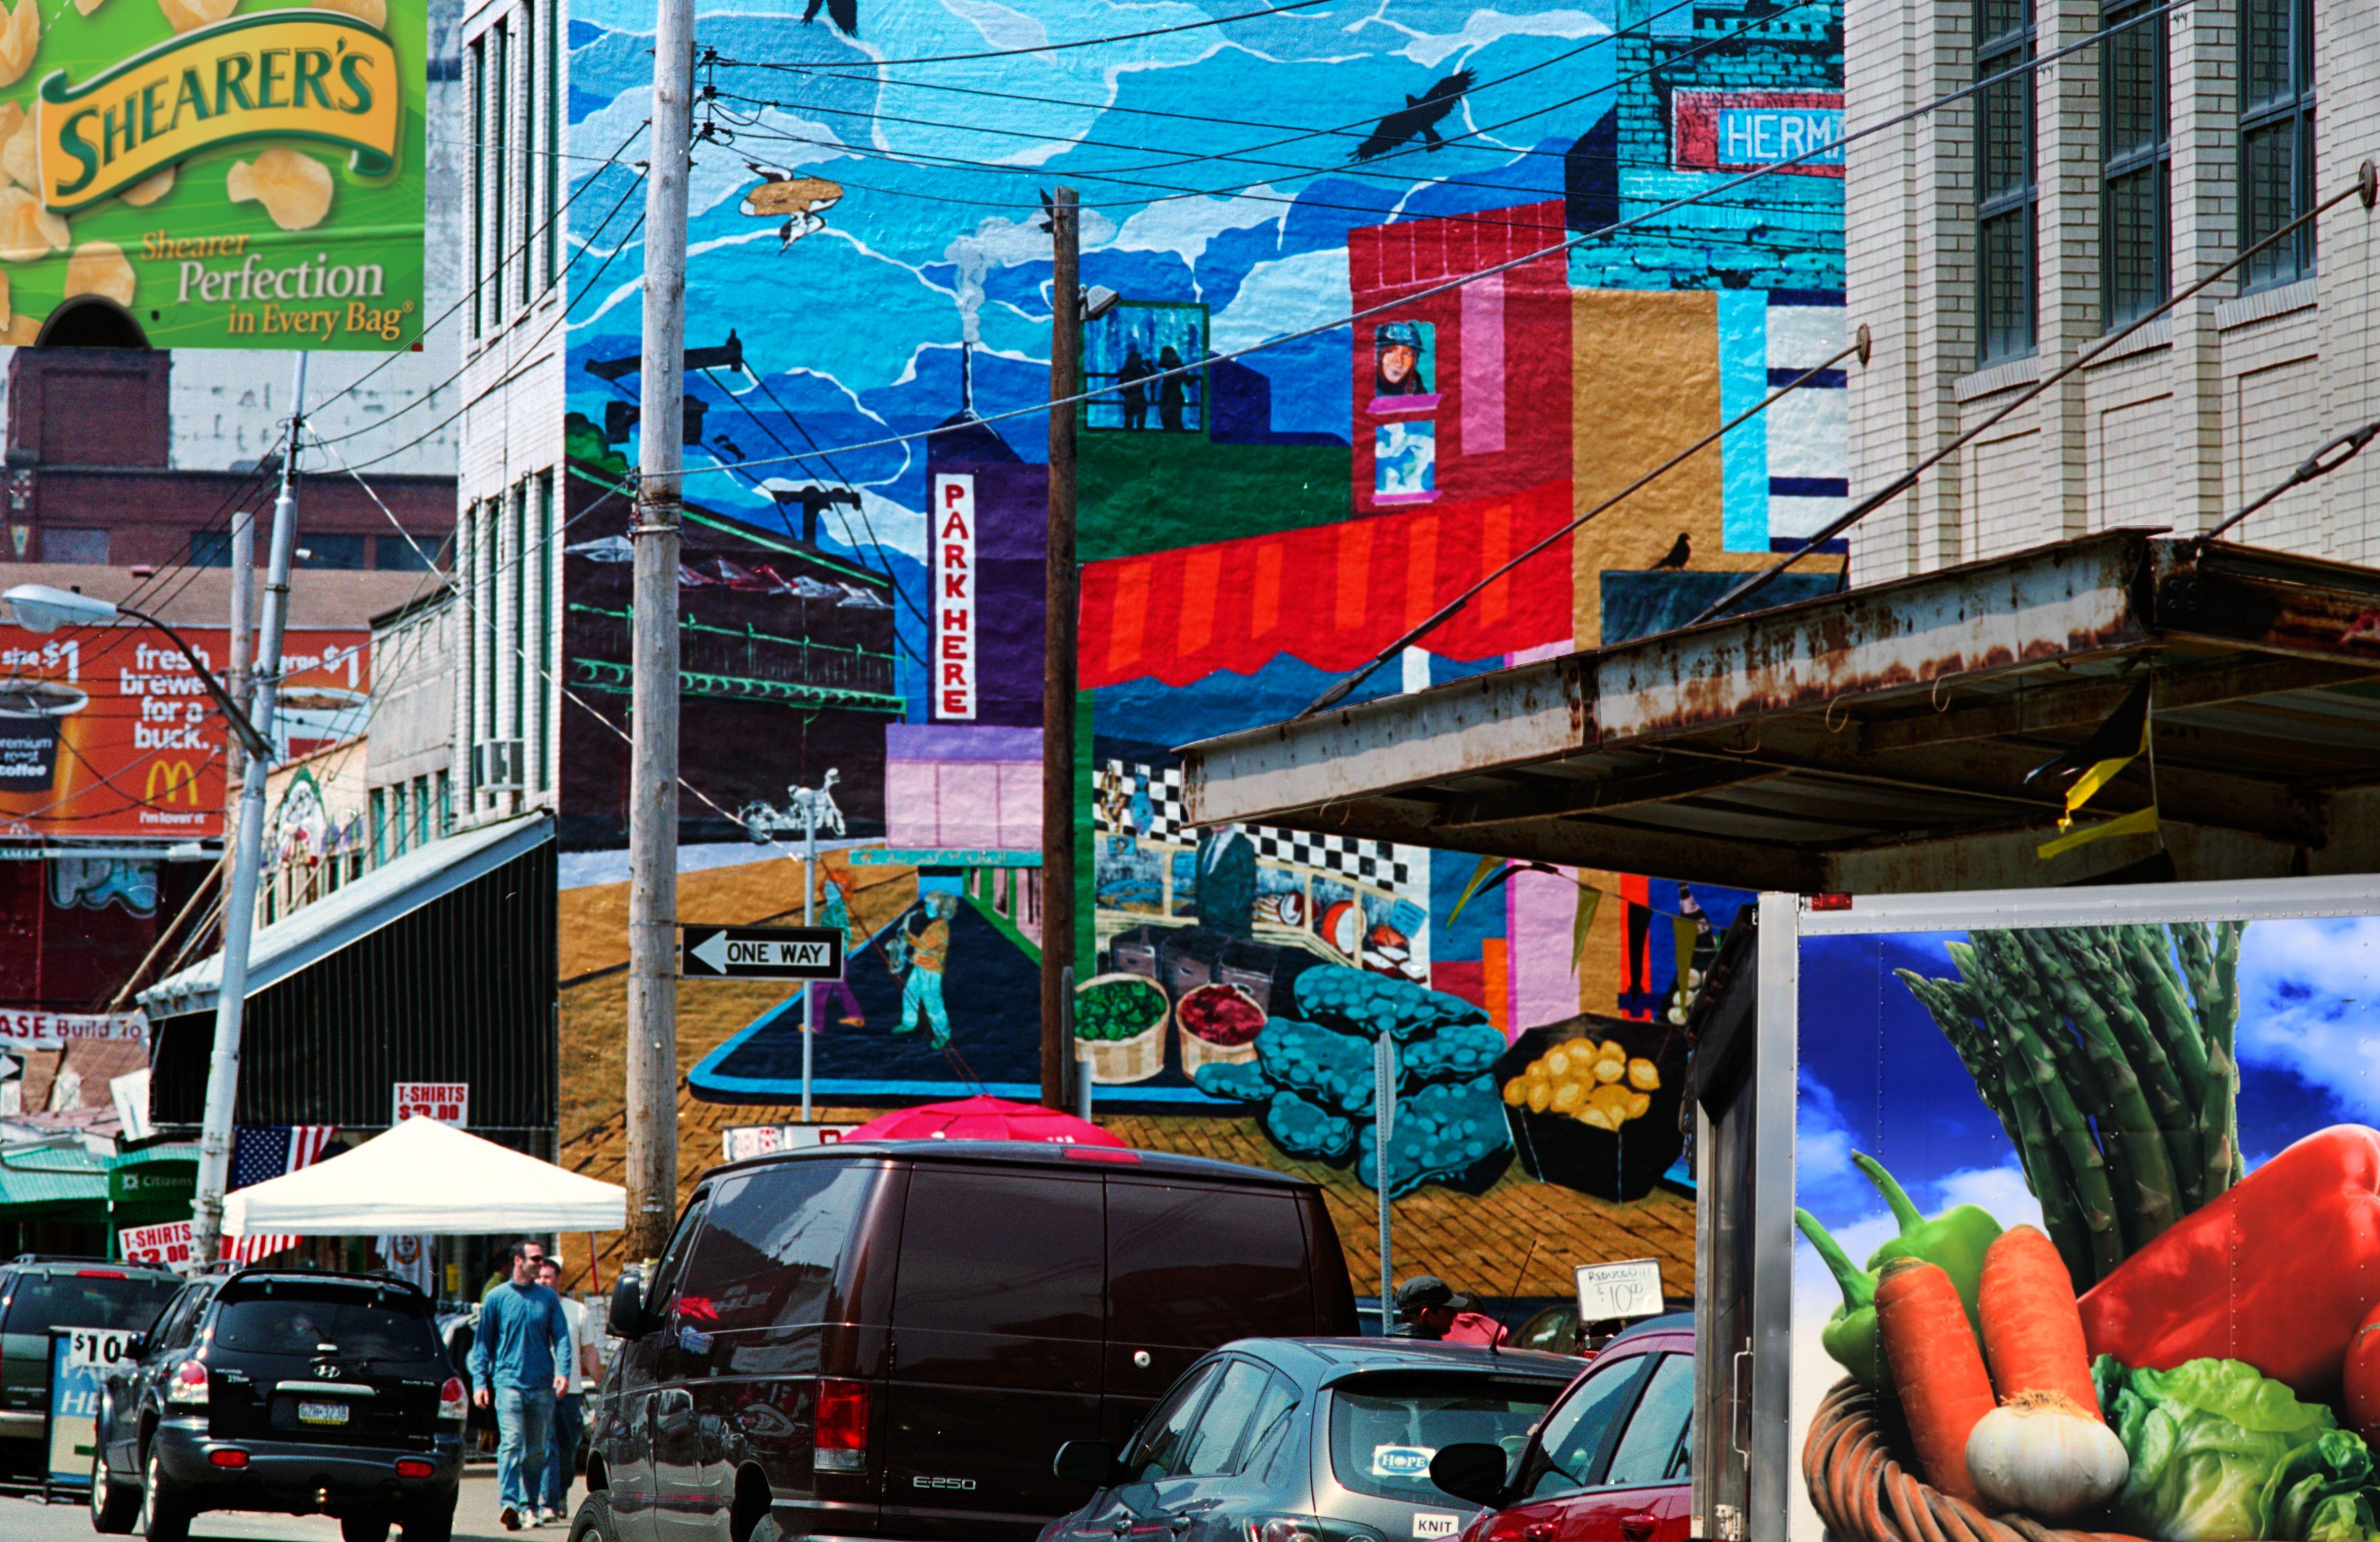 John Flatz Color Photograph - Strip District Mural and Signs, Photograph, Archival Ink Jet